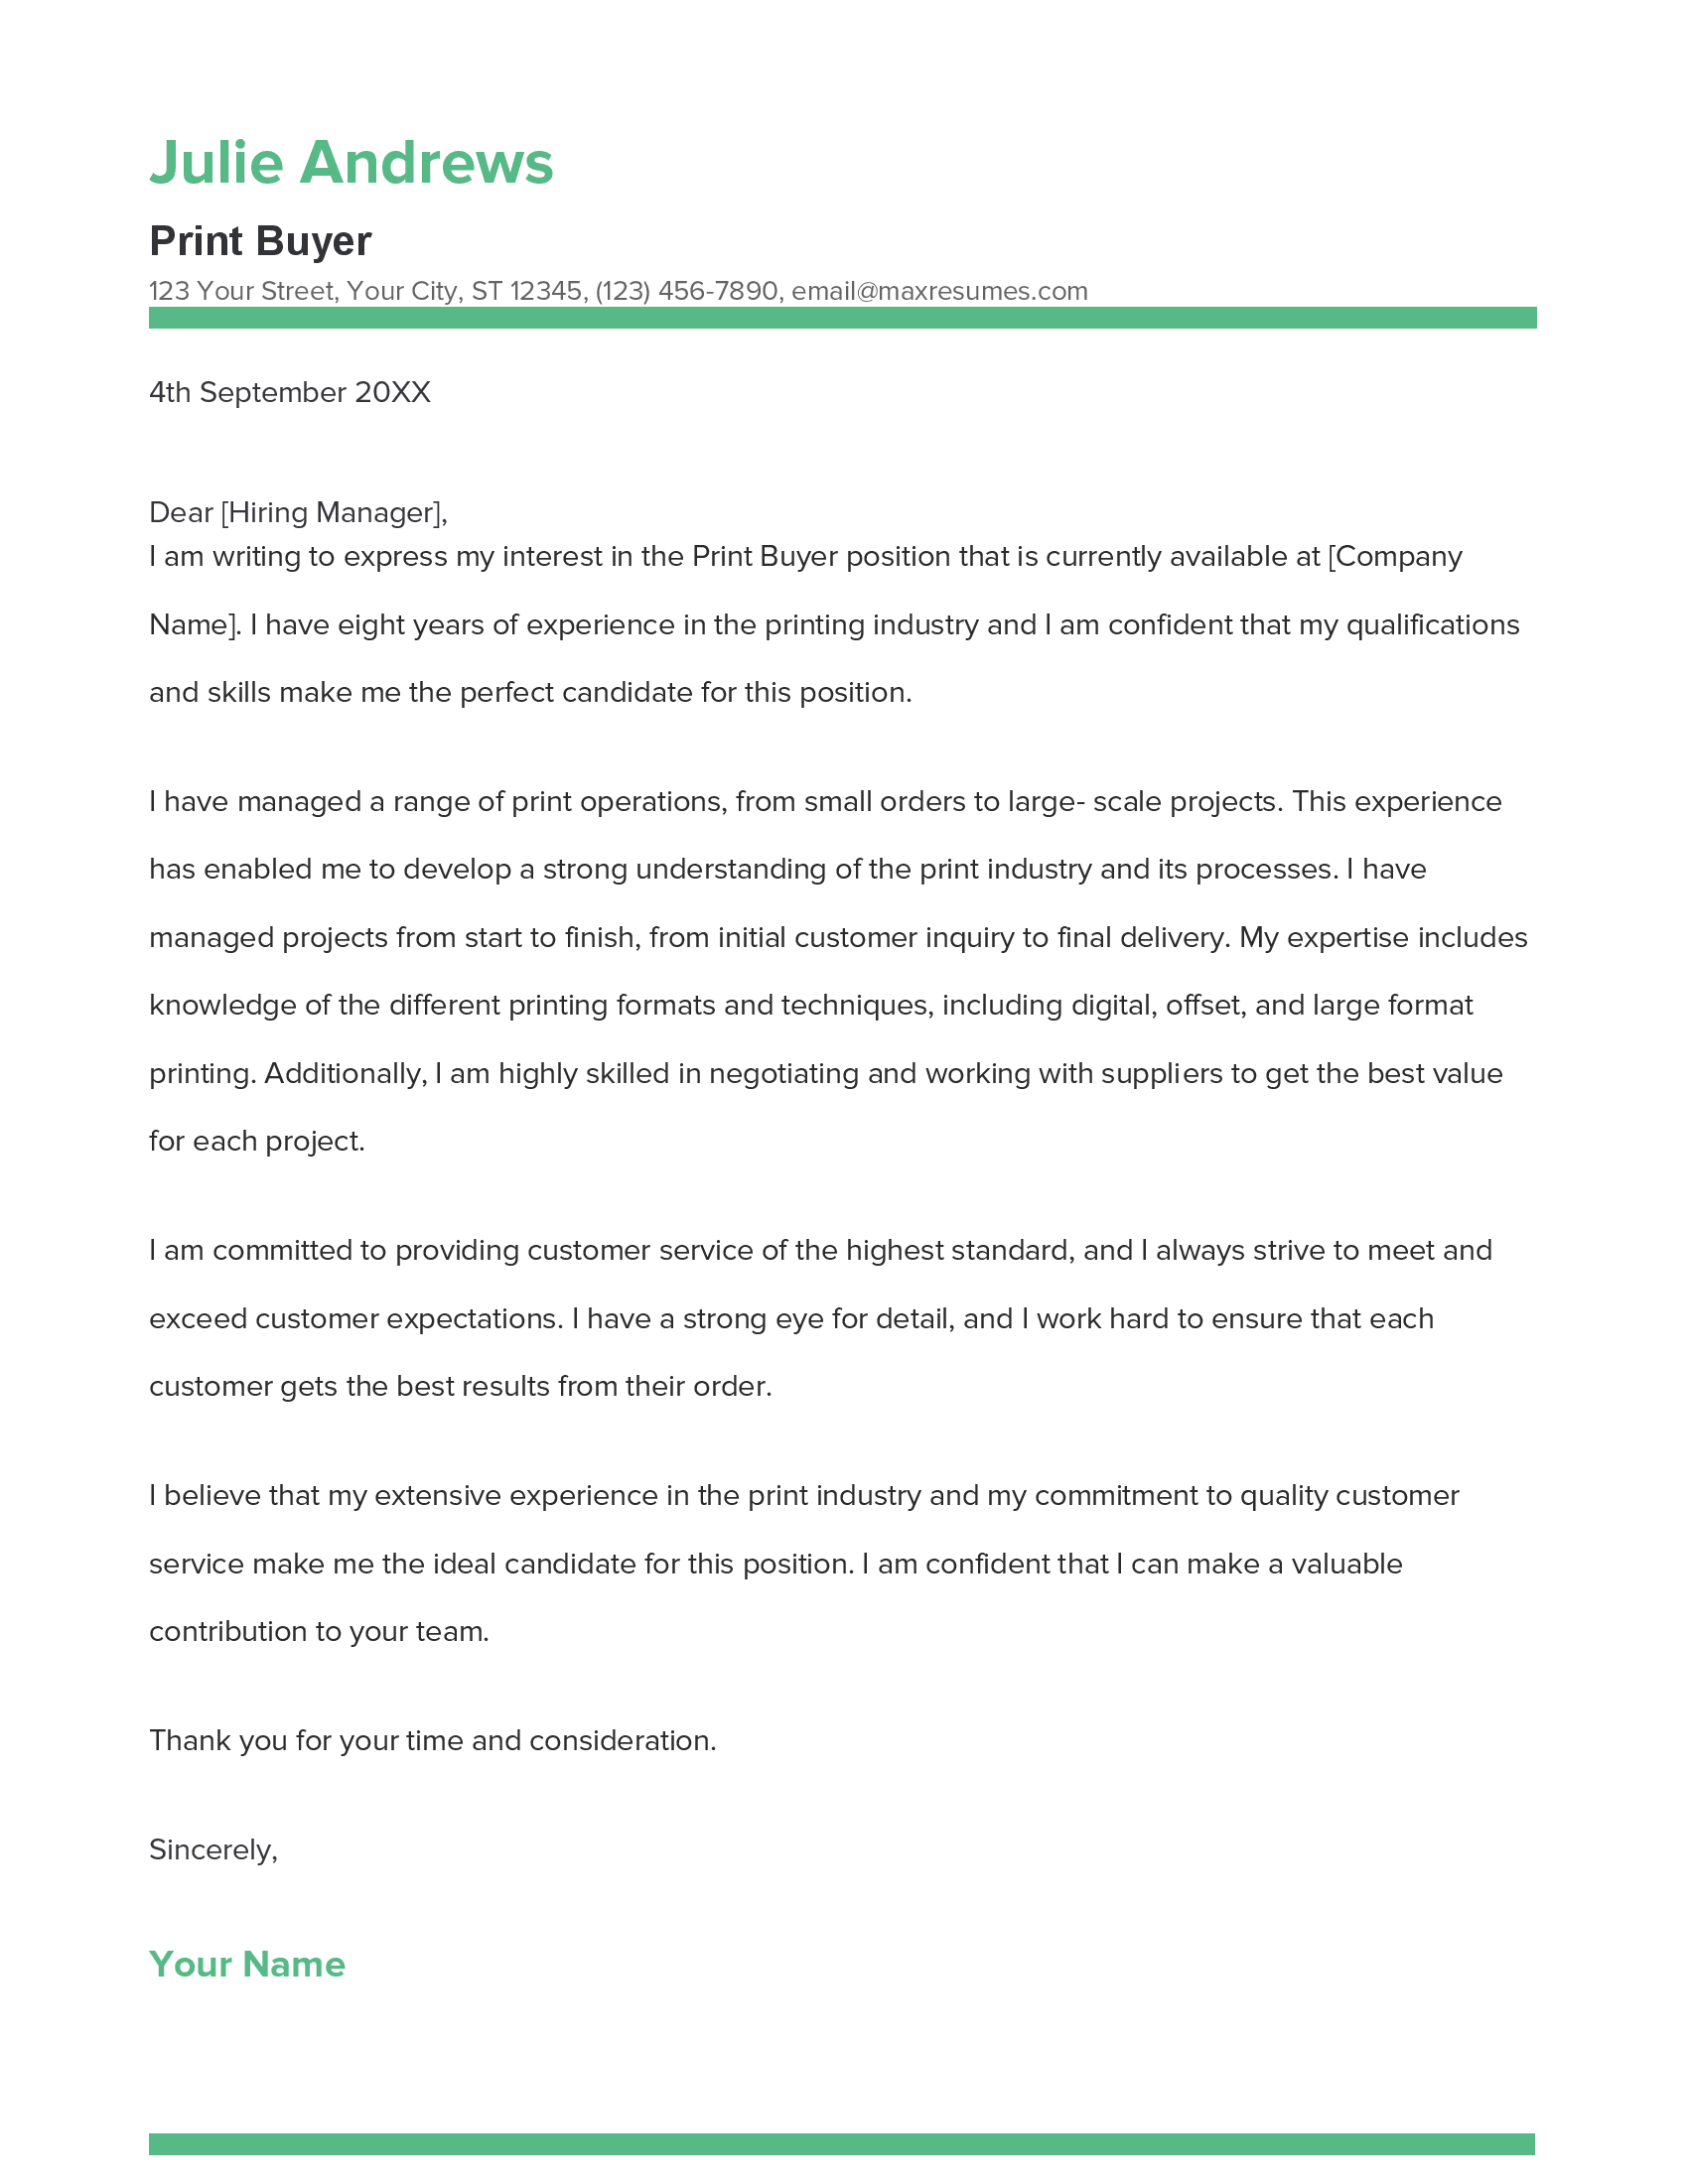 Print Buyer Cover Letter Example